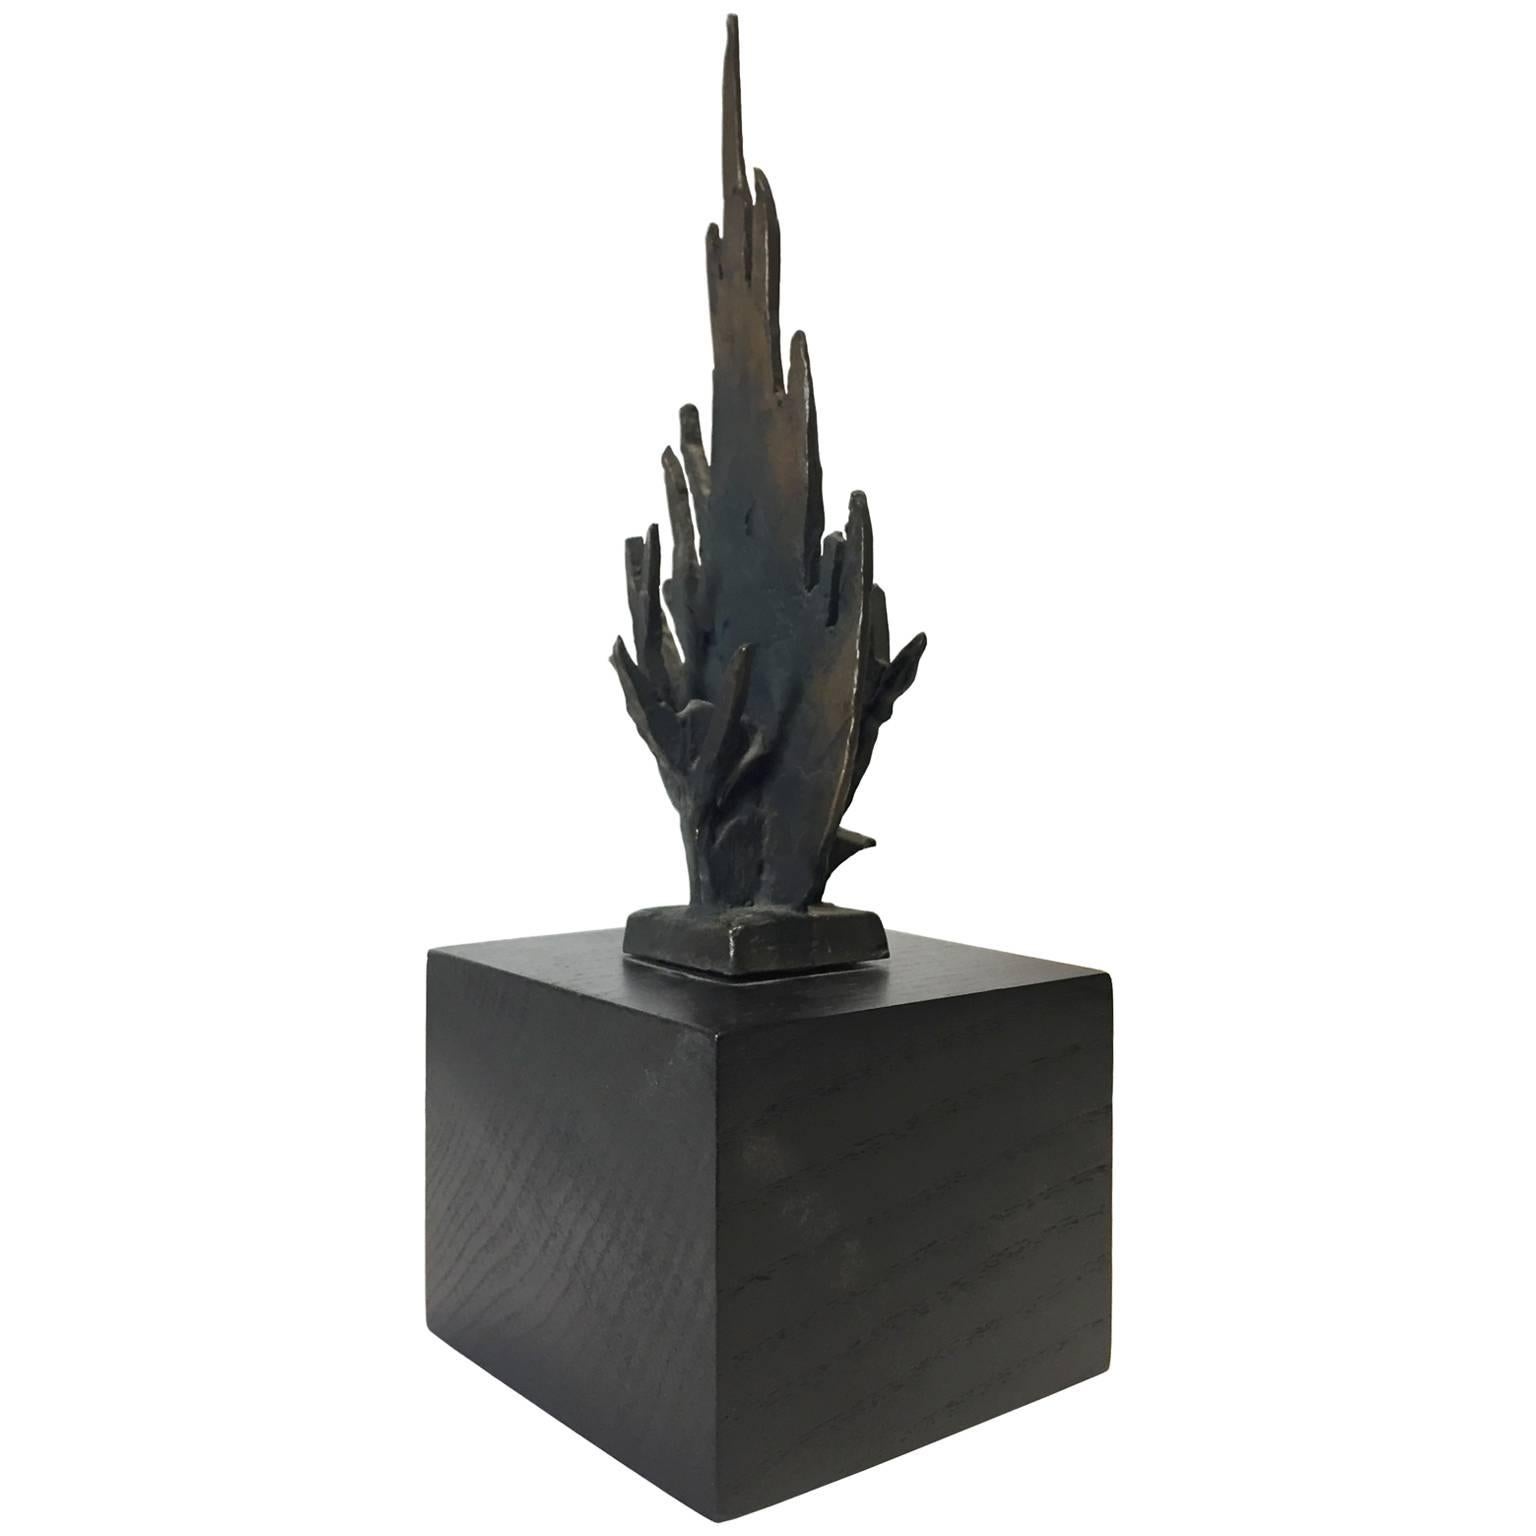 Mid-Century bronze flame sculpture on a ebonized wood plinth by Chaim Gross. USA, 1960's.